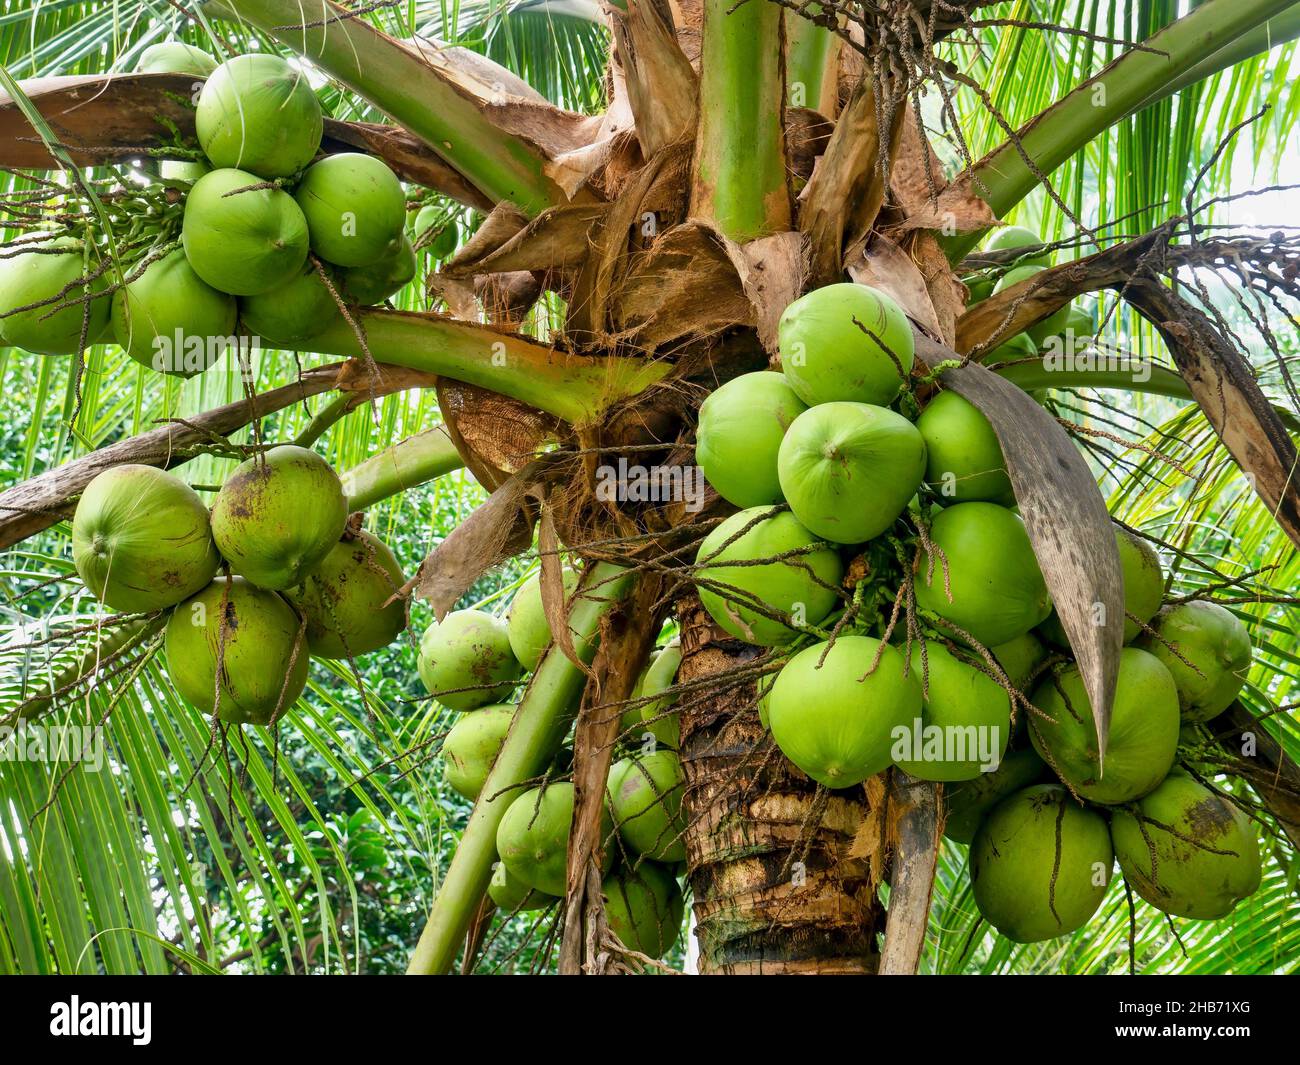 Close-up view of ripe green coconuts growing in clusters at the top of a palm tree (Cocos nucifera) in a plantation in the Philippines. Stock Photo